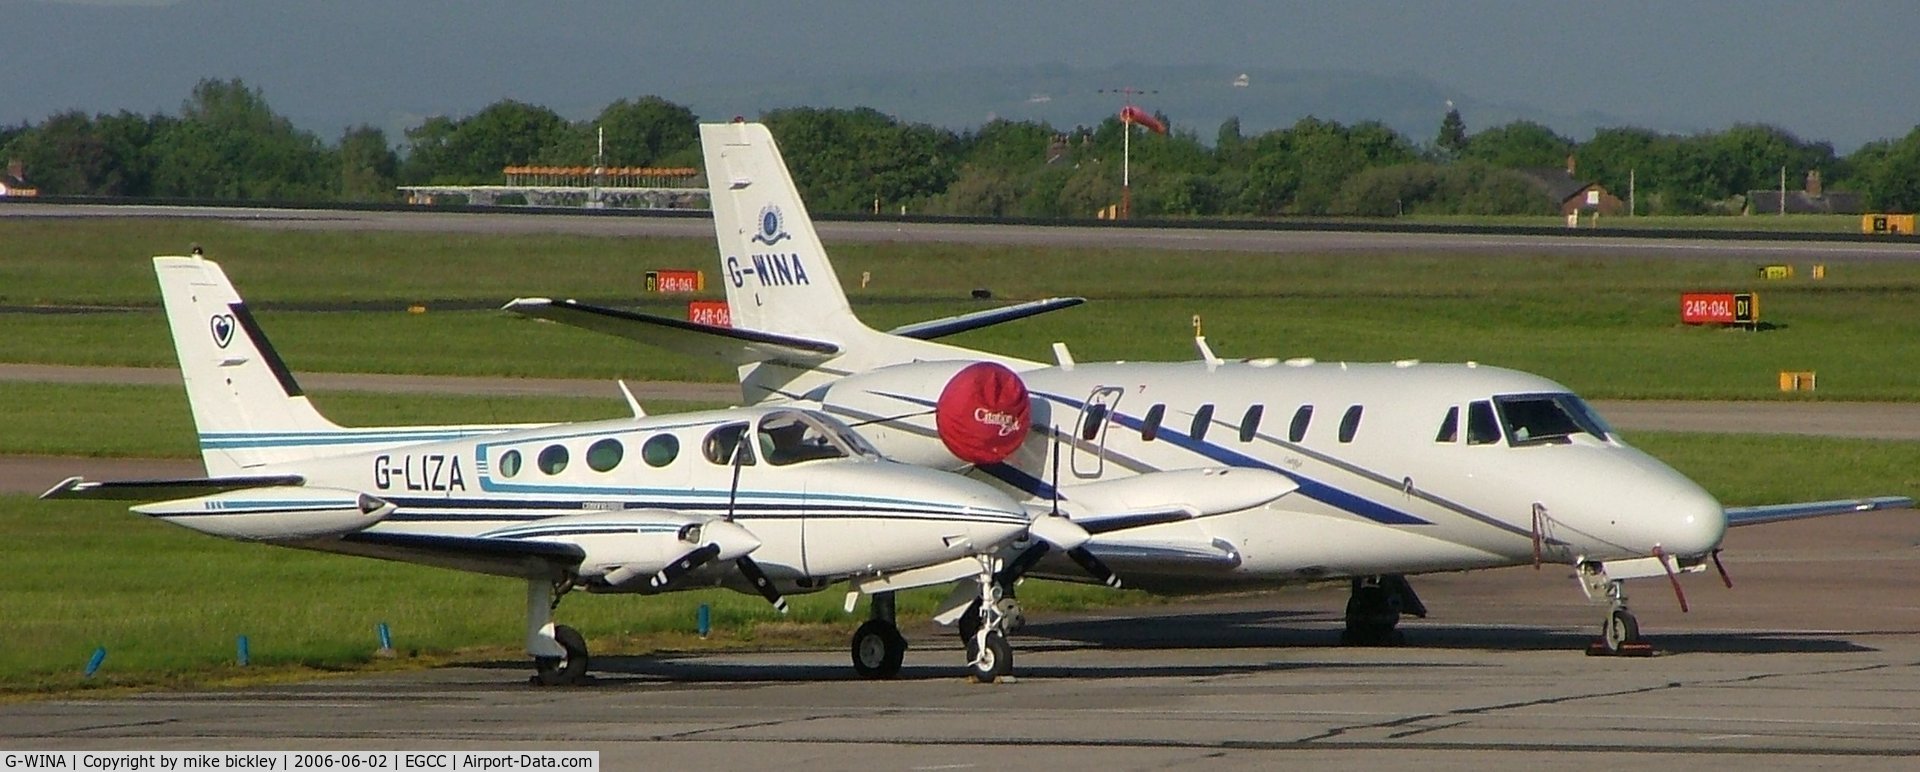 G-WINA, 2003 Cessna 560XL Citation Excel C/N 560-5343, parked with engine covers on.